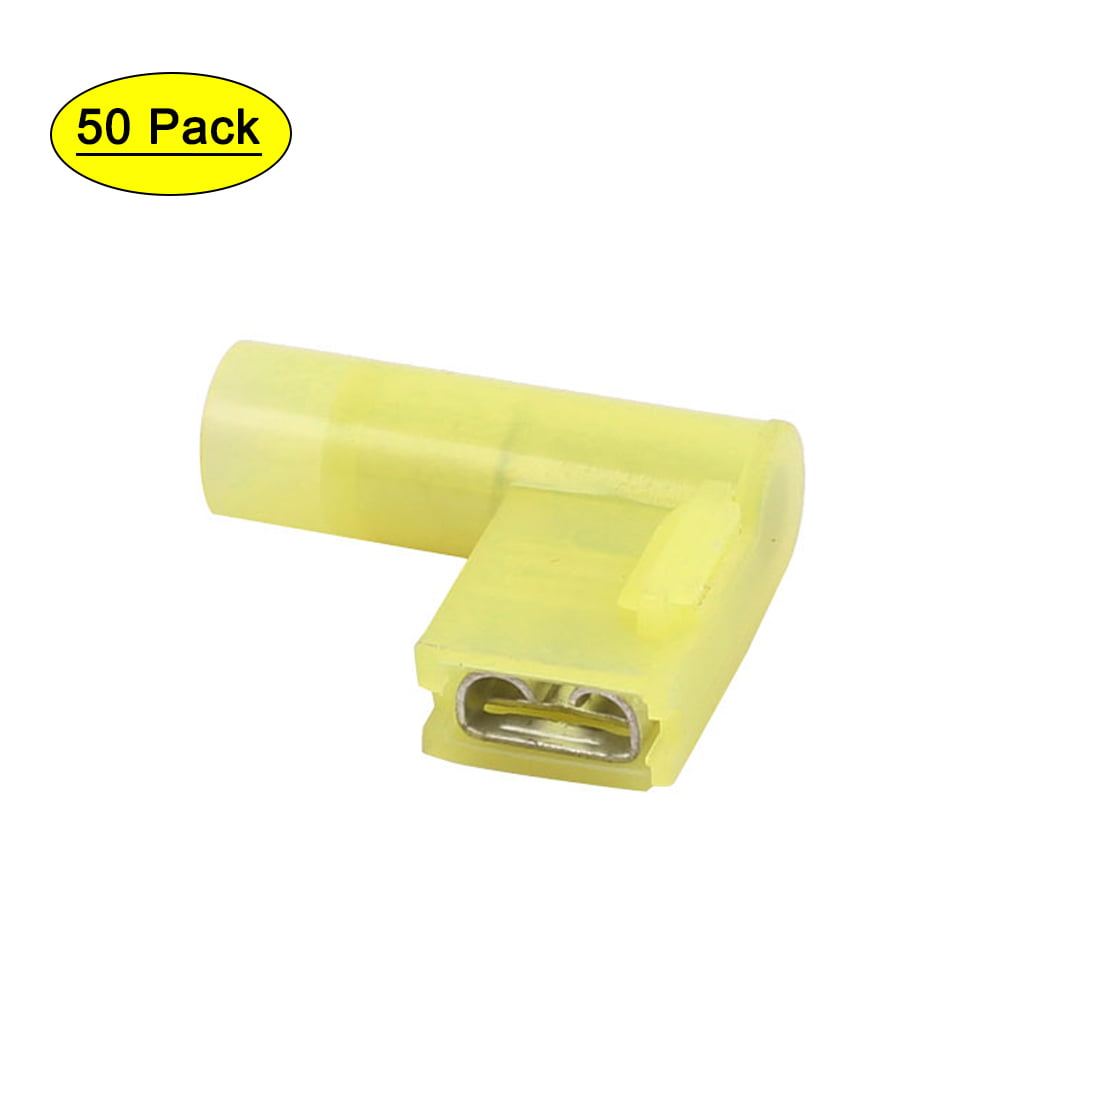 50pcs Yellow Flag Shaped Female Wire Crimp Terminal Nylon Insulated Connectors 